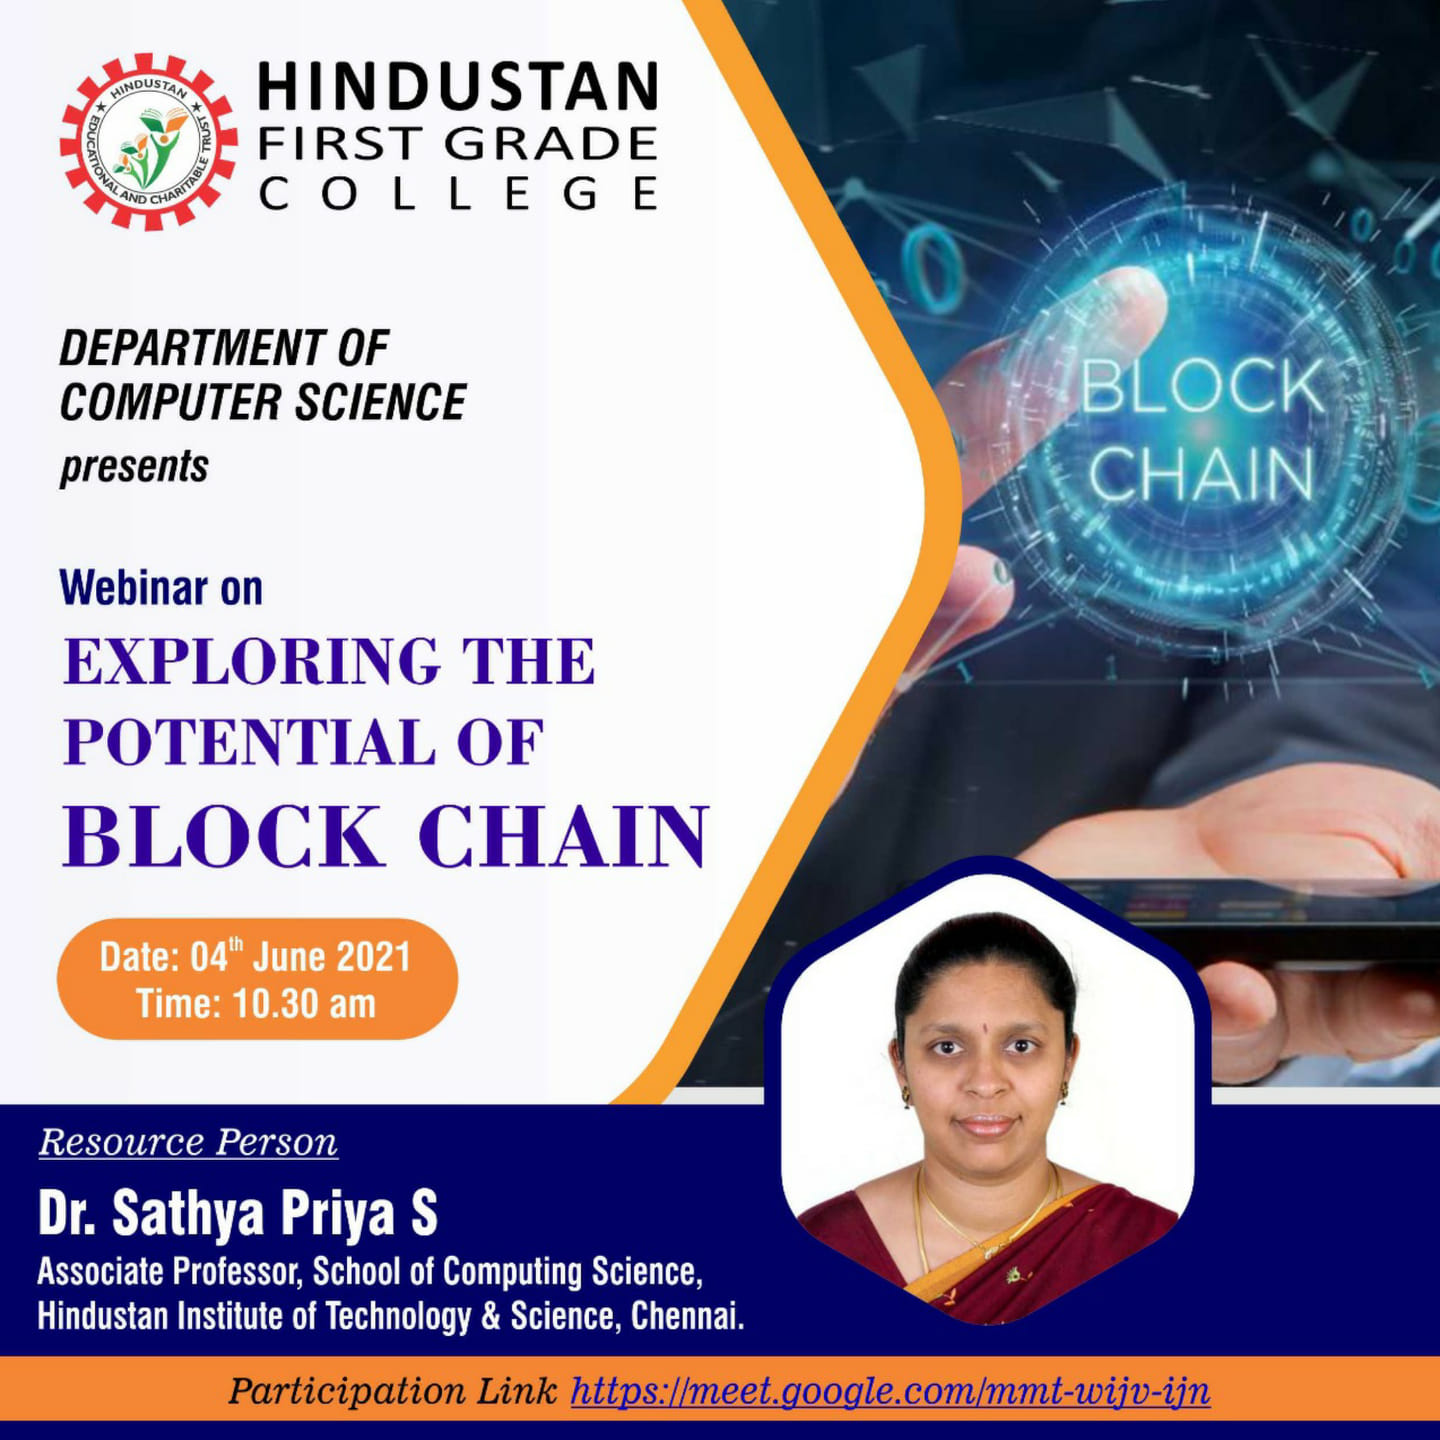 WEBINAR ON “EXPLORING THE POTENTIAL OF BLOCK CHAIN”